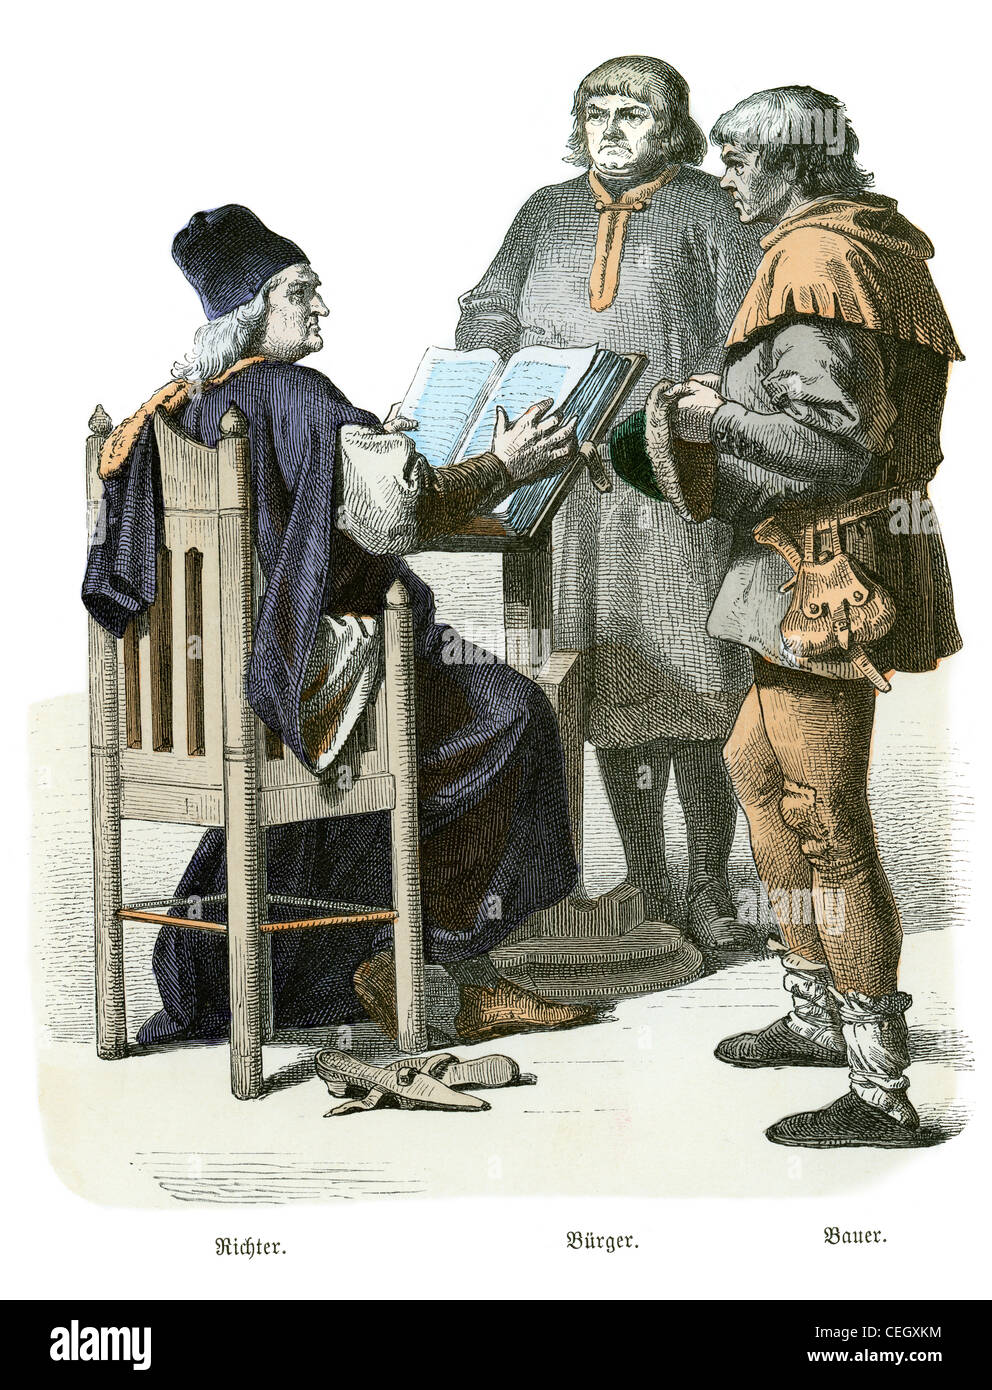 A Judge, Burgermeister and Builder from Germany in the first half of the 15th century Stock Photo